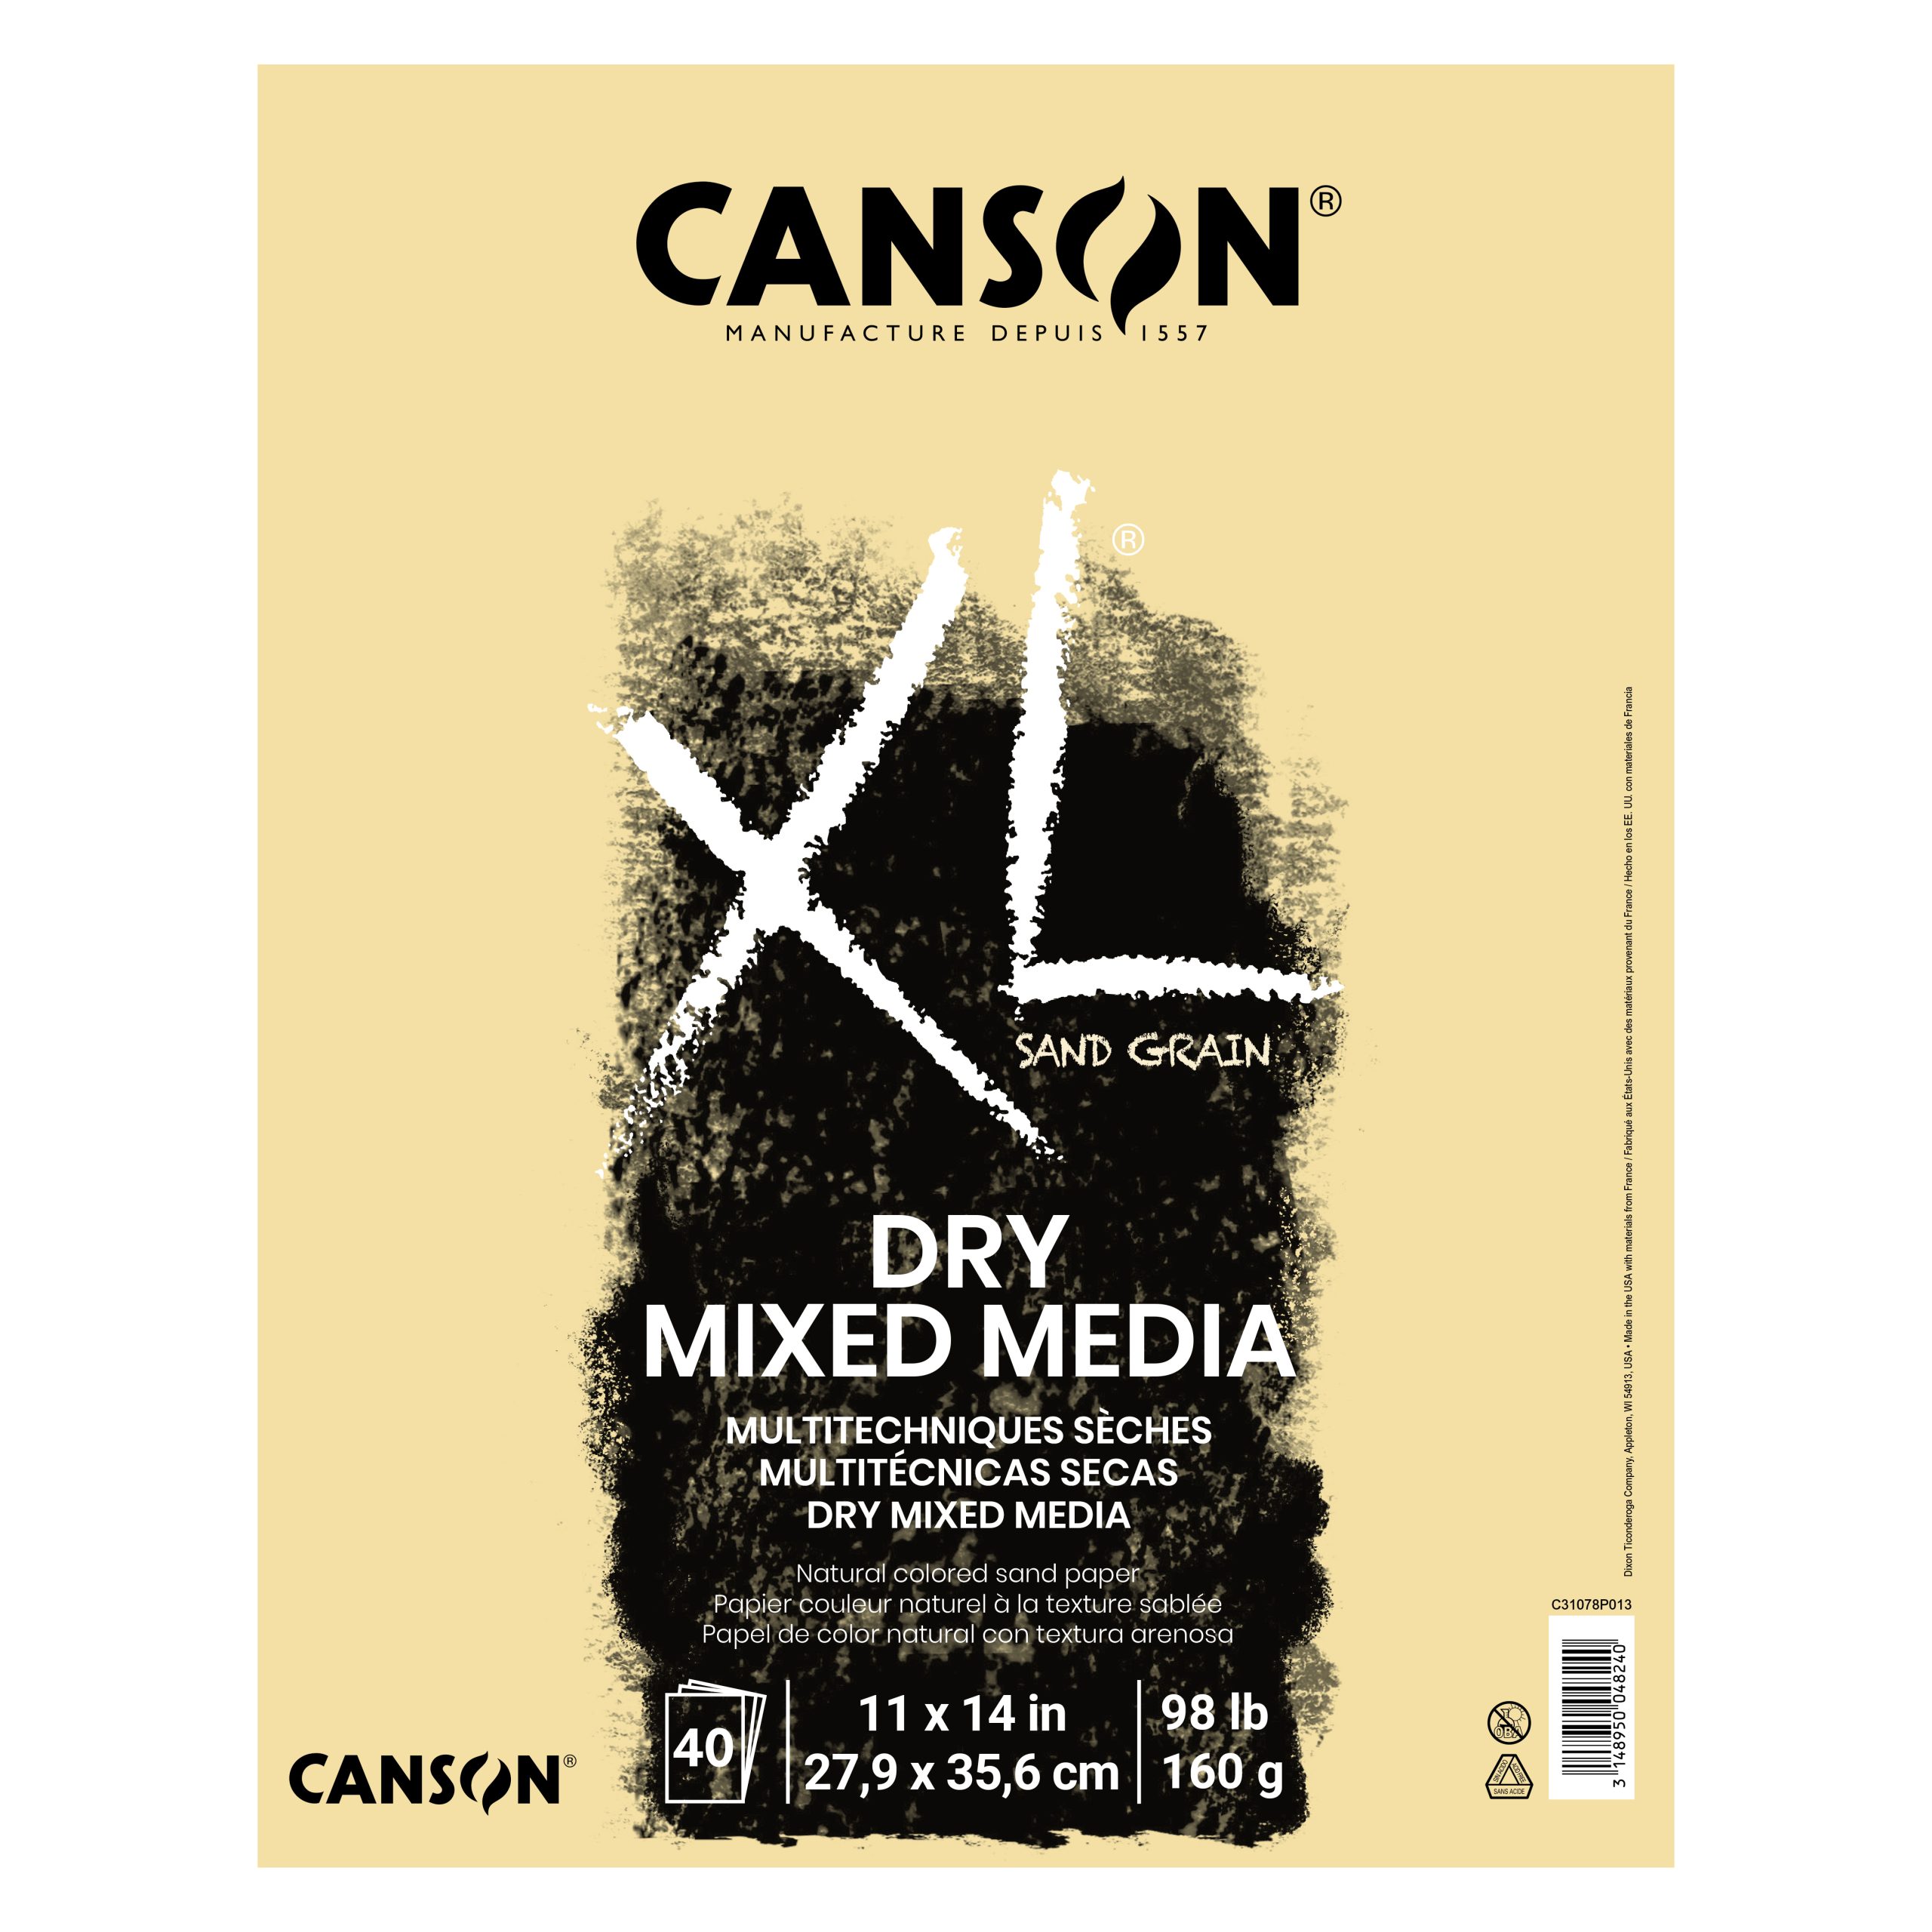 Canson XL Sand Grain Natural Dry Mixed Media Pads